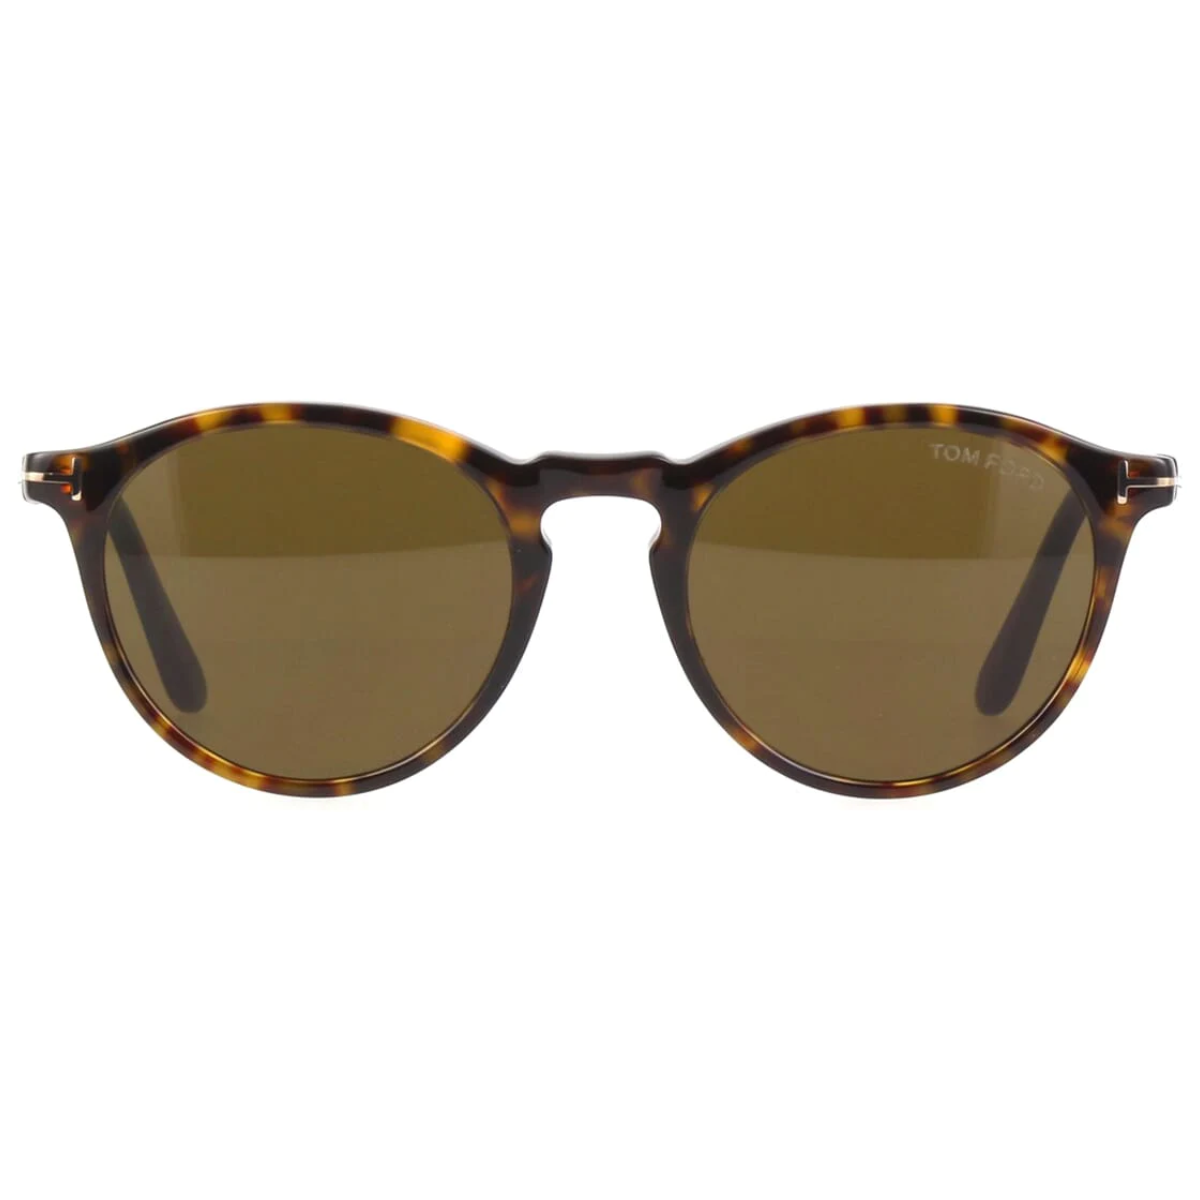  "Embrace timeless elegance with Tom Ford TF904 52J Circle Sunglasses, crafted for both men and women. Explore Optorium's collection for top-rated unisex sunglasses from the renowned Tom Ford eyewear range."